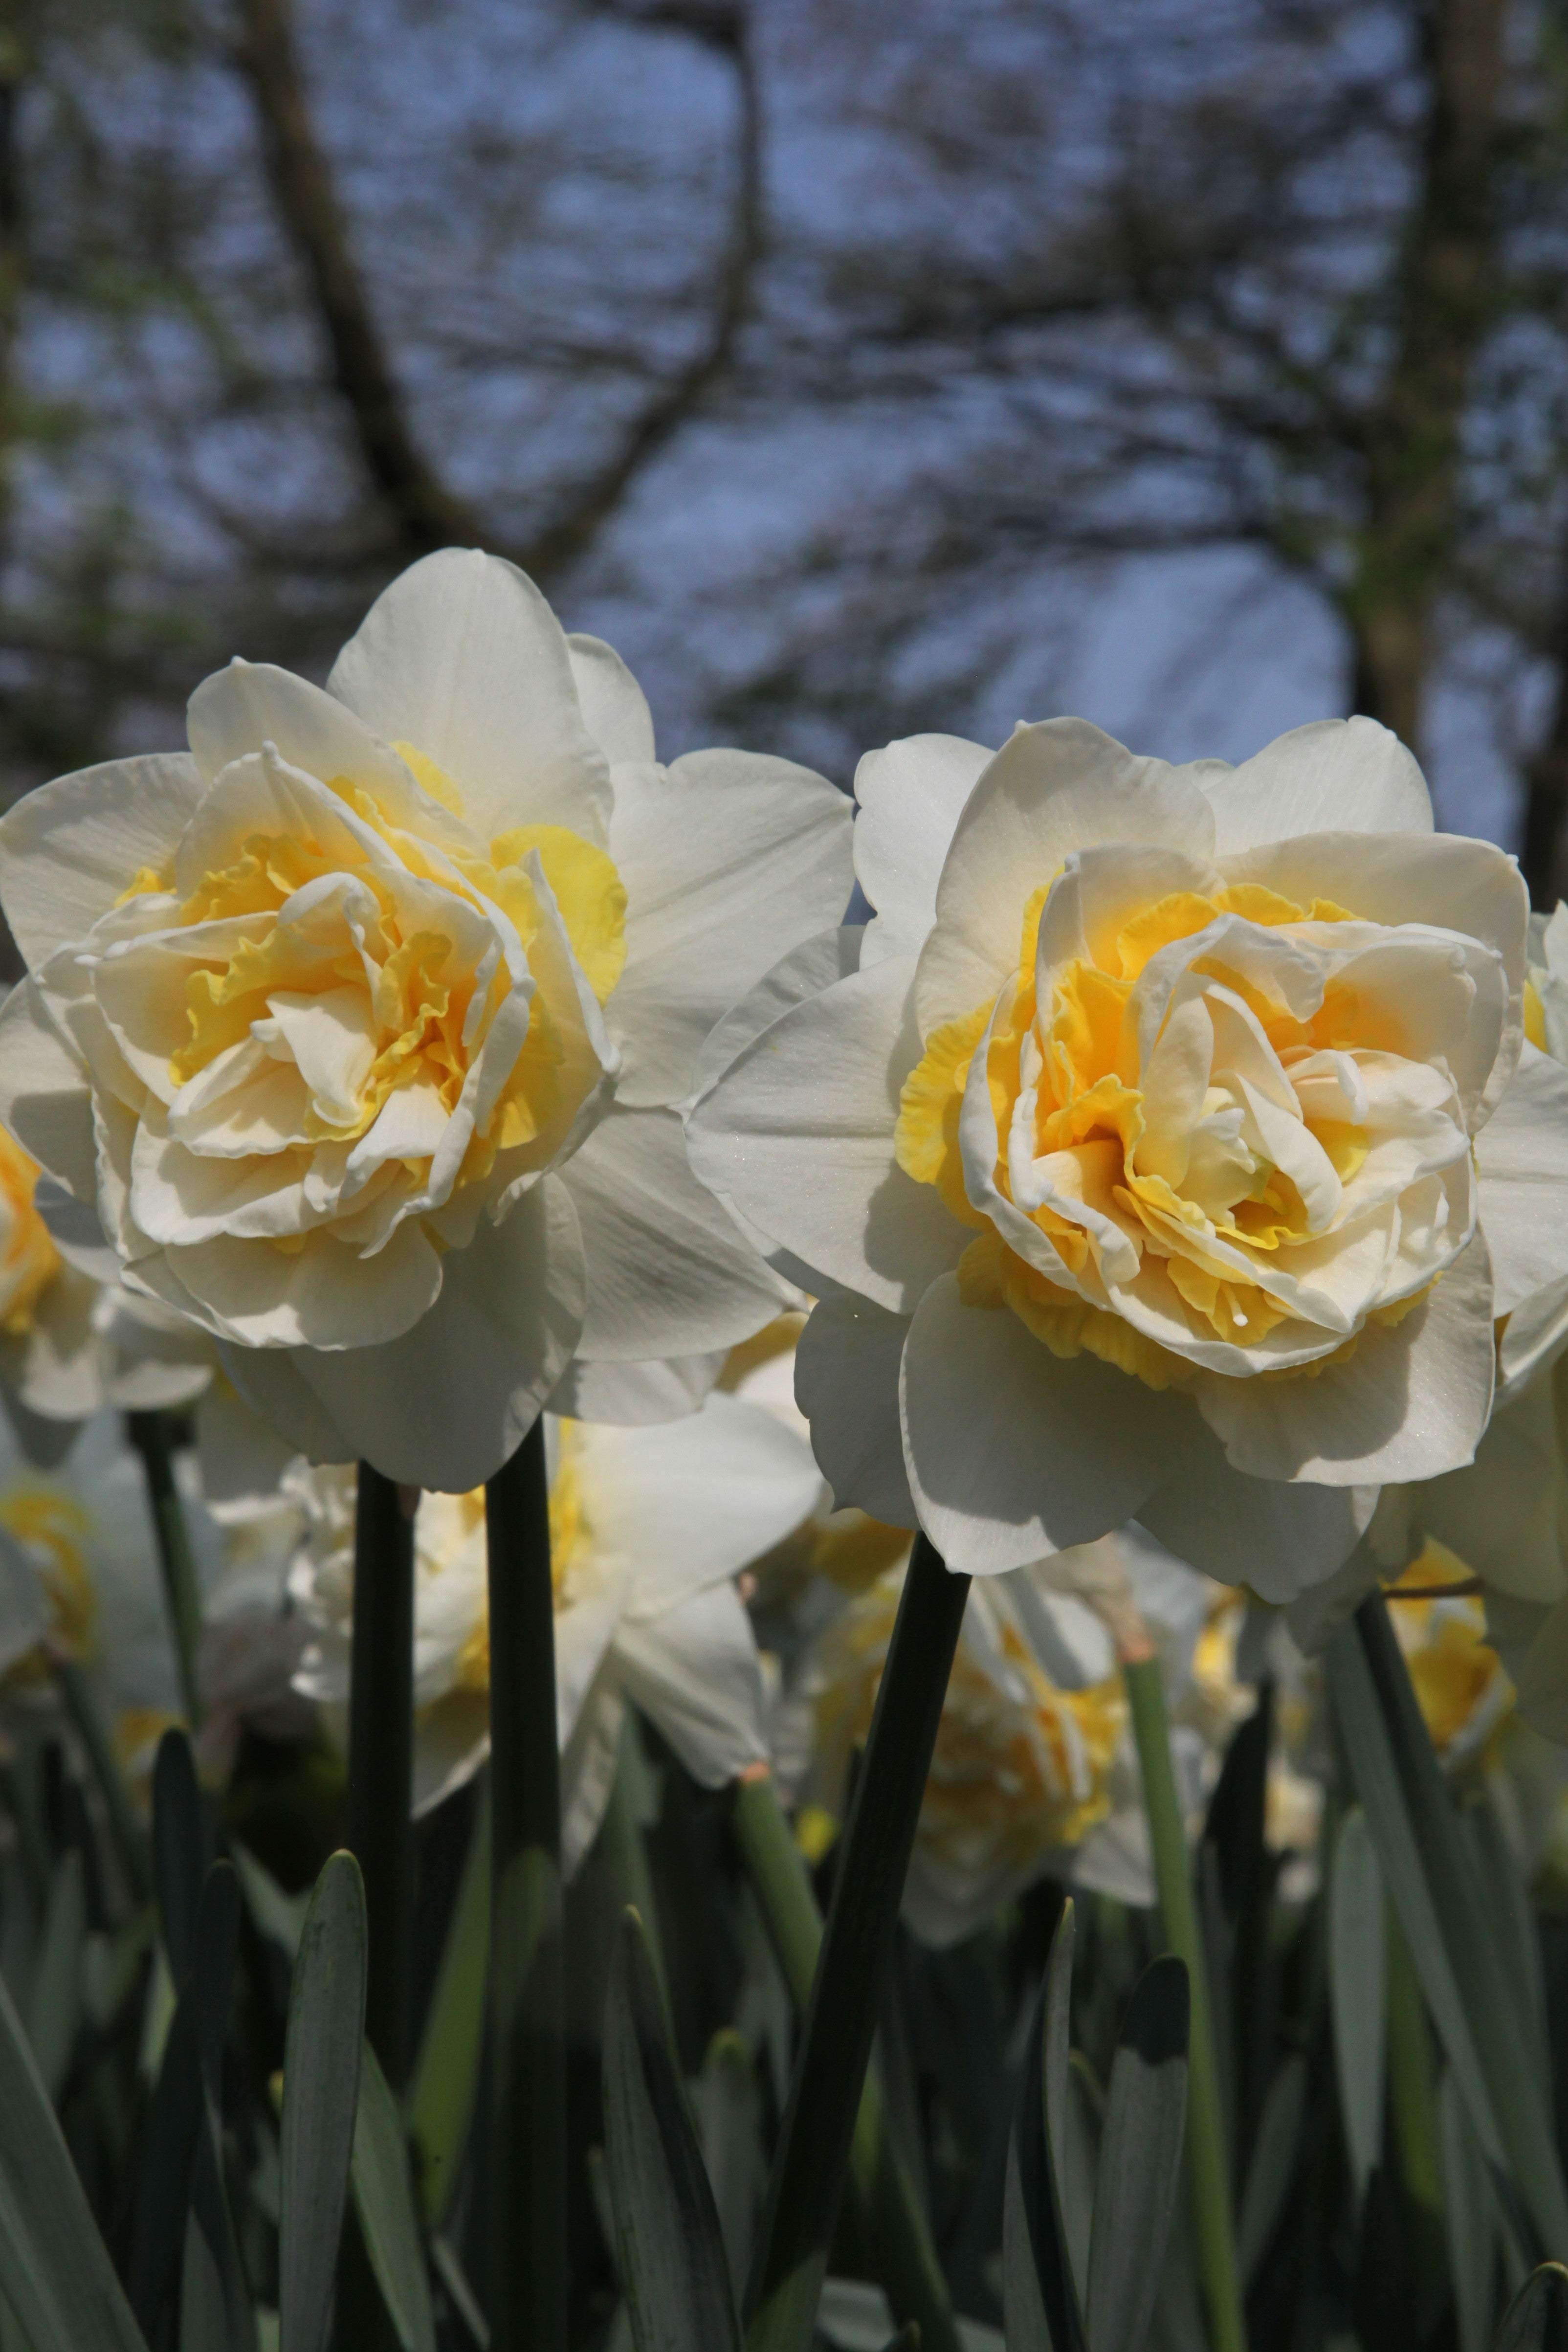 Daffodil Lingerie has white petals, and a orange ruffled heart